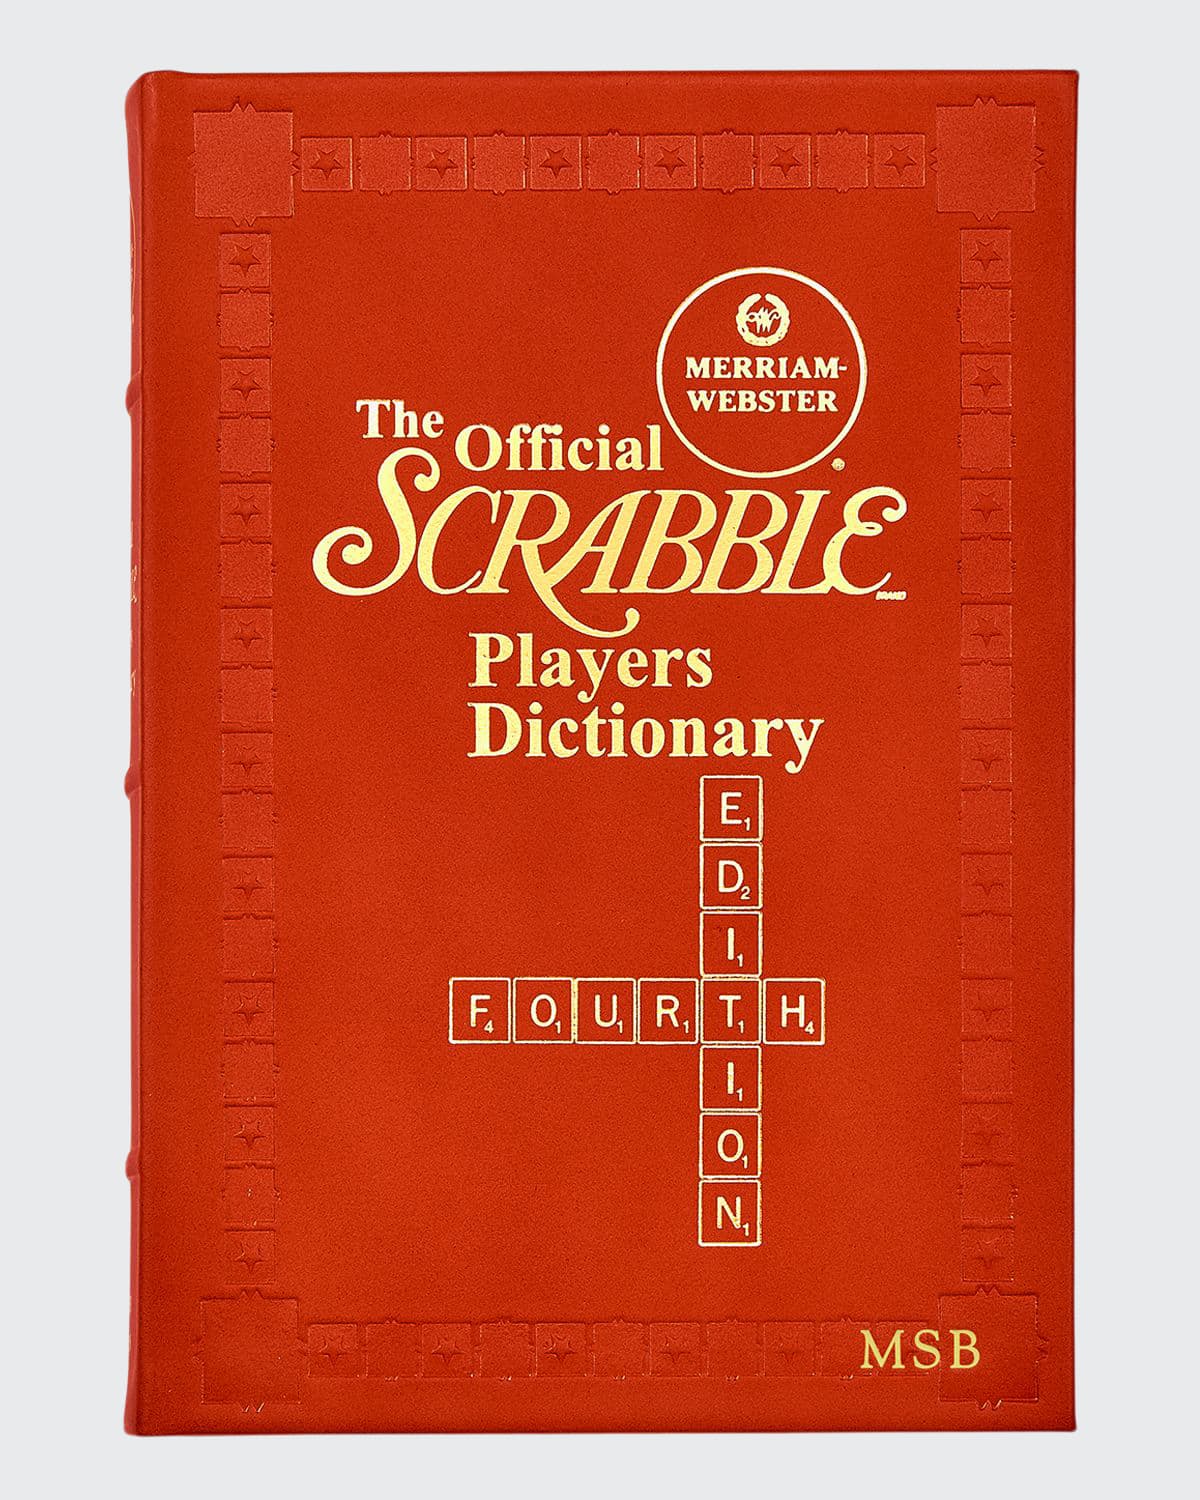 Shop Graphic Image The Official Merriam-webster Scrabble Players Dictionary, Fourth Edition, Personalized In Red